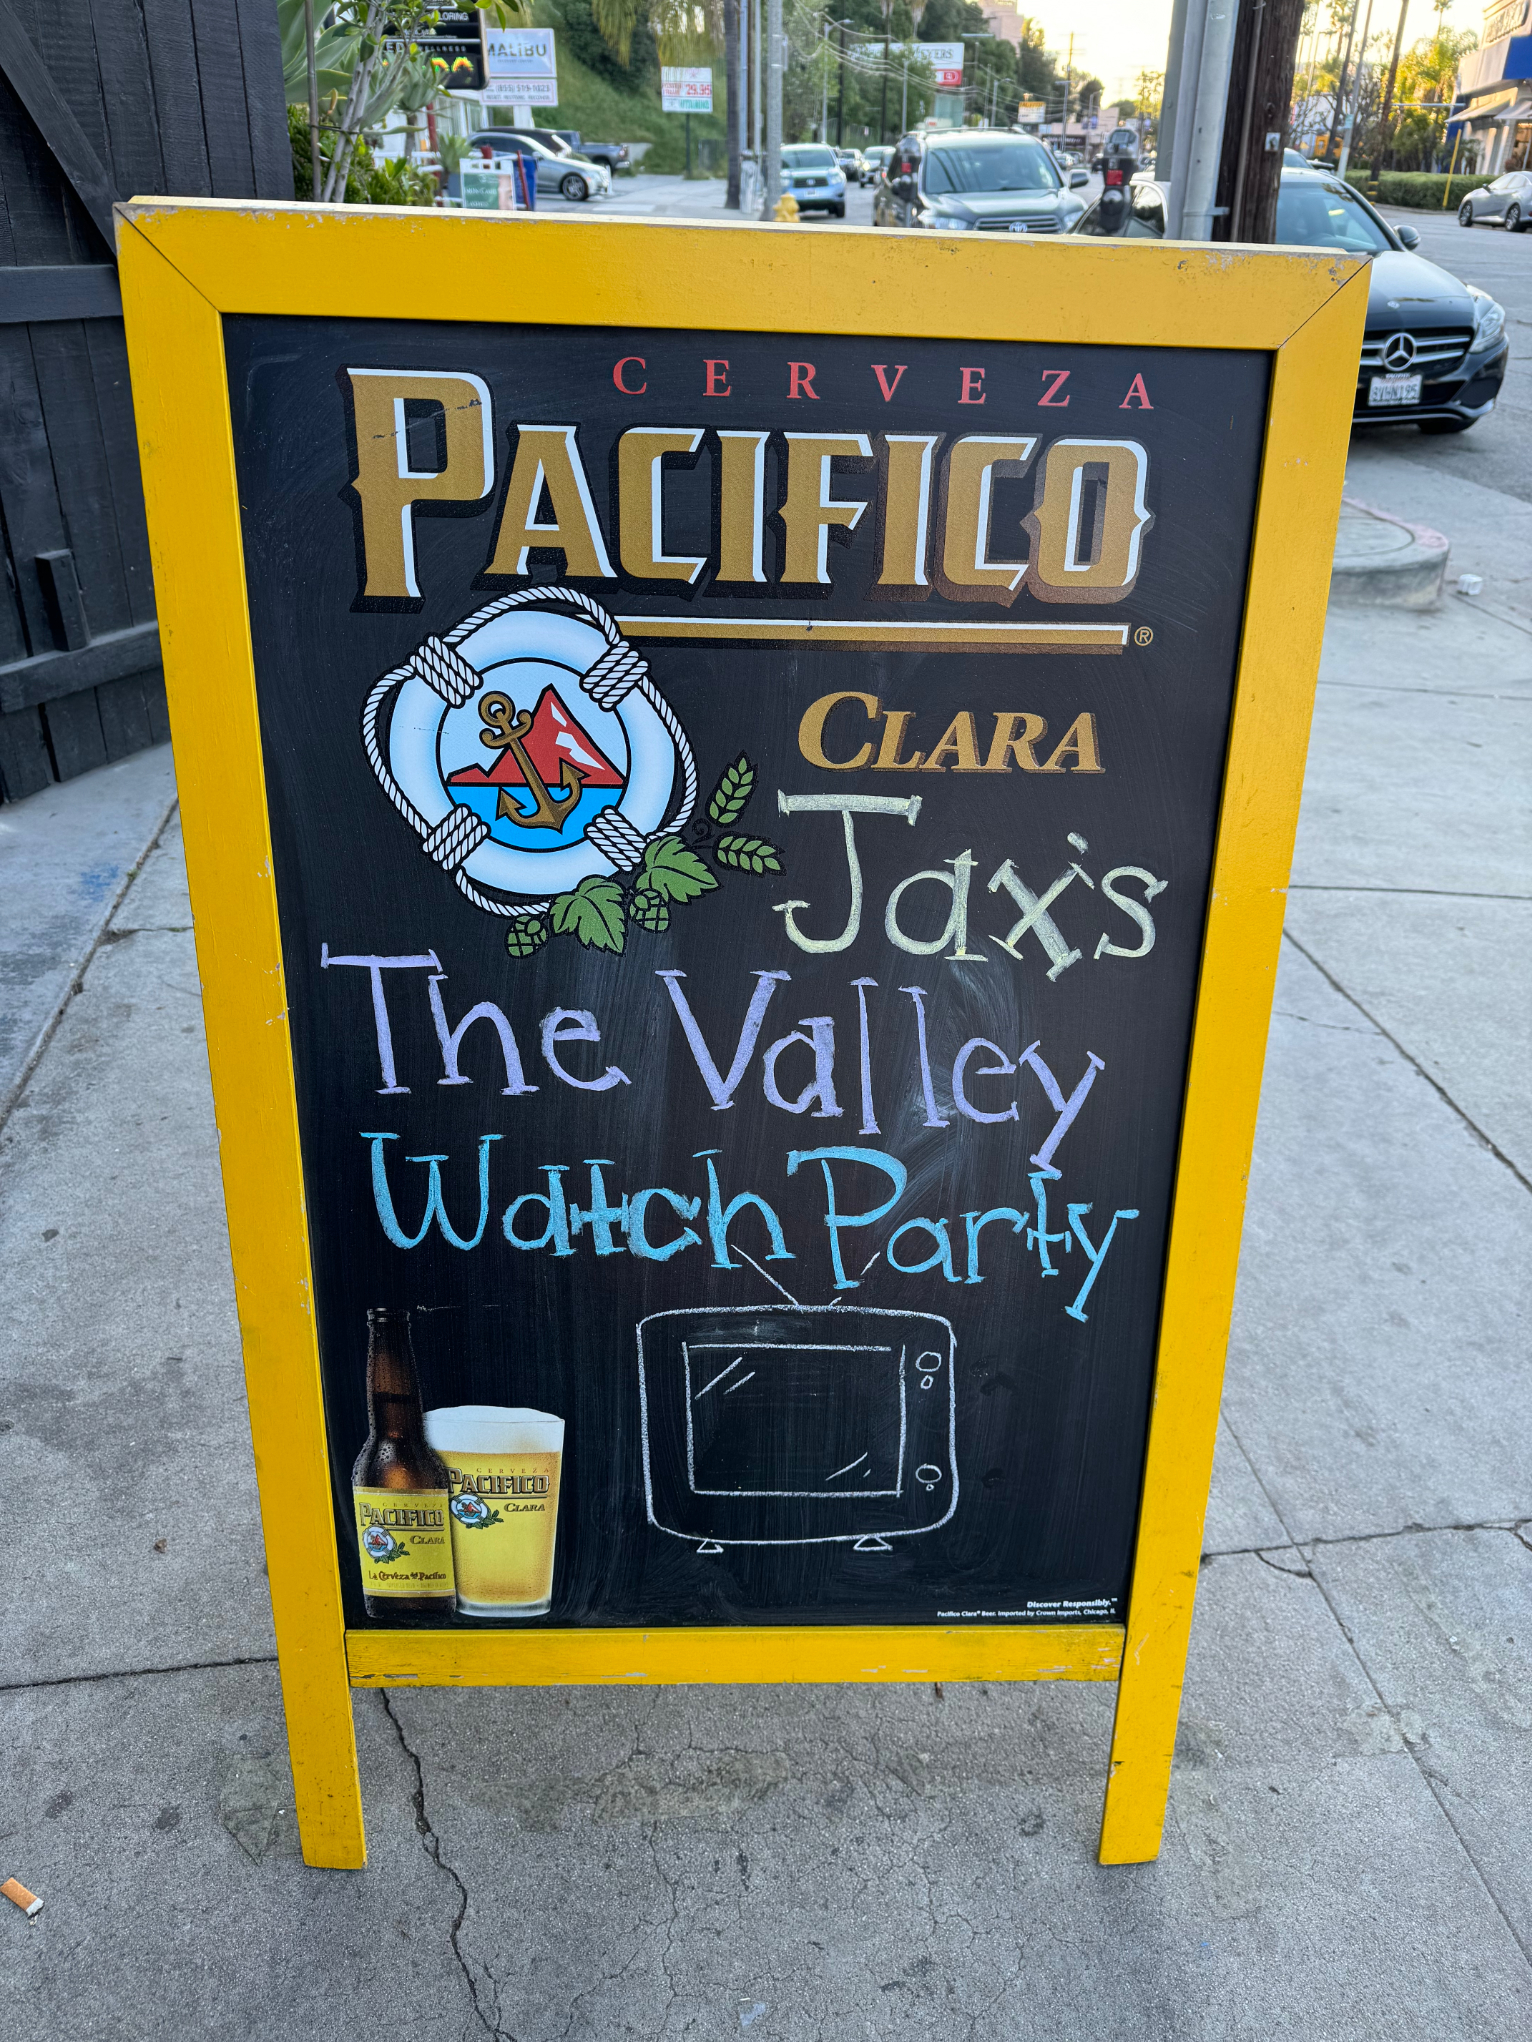 Sidewalk sign advertising Pacifico beer and promoting Jaxi&#x27;s The Valley Watch Party